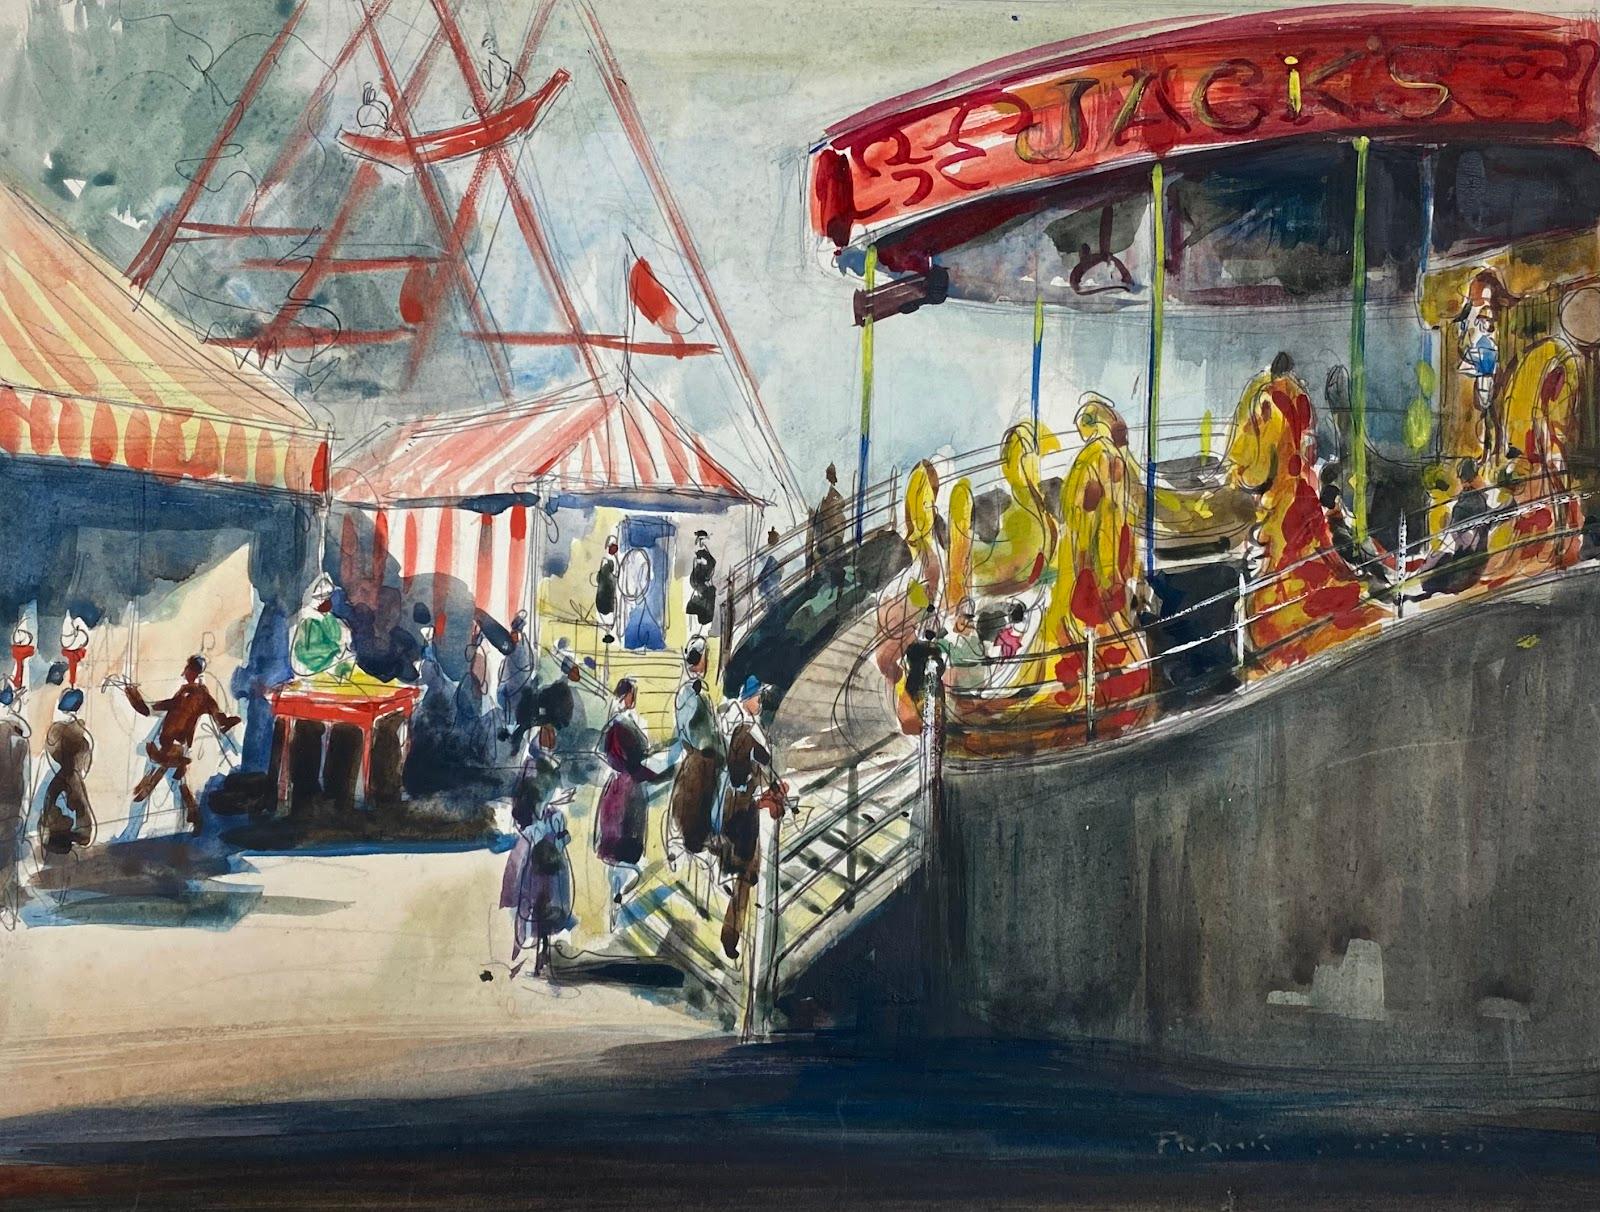 Frank Duffield Landscape Art - British Impressionist Painting The Carousel At A FunFair